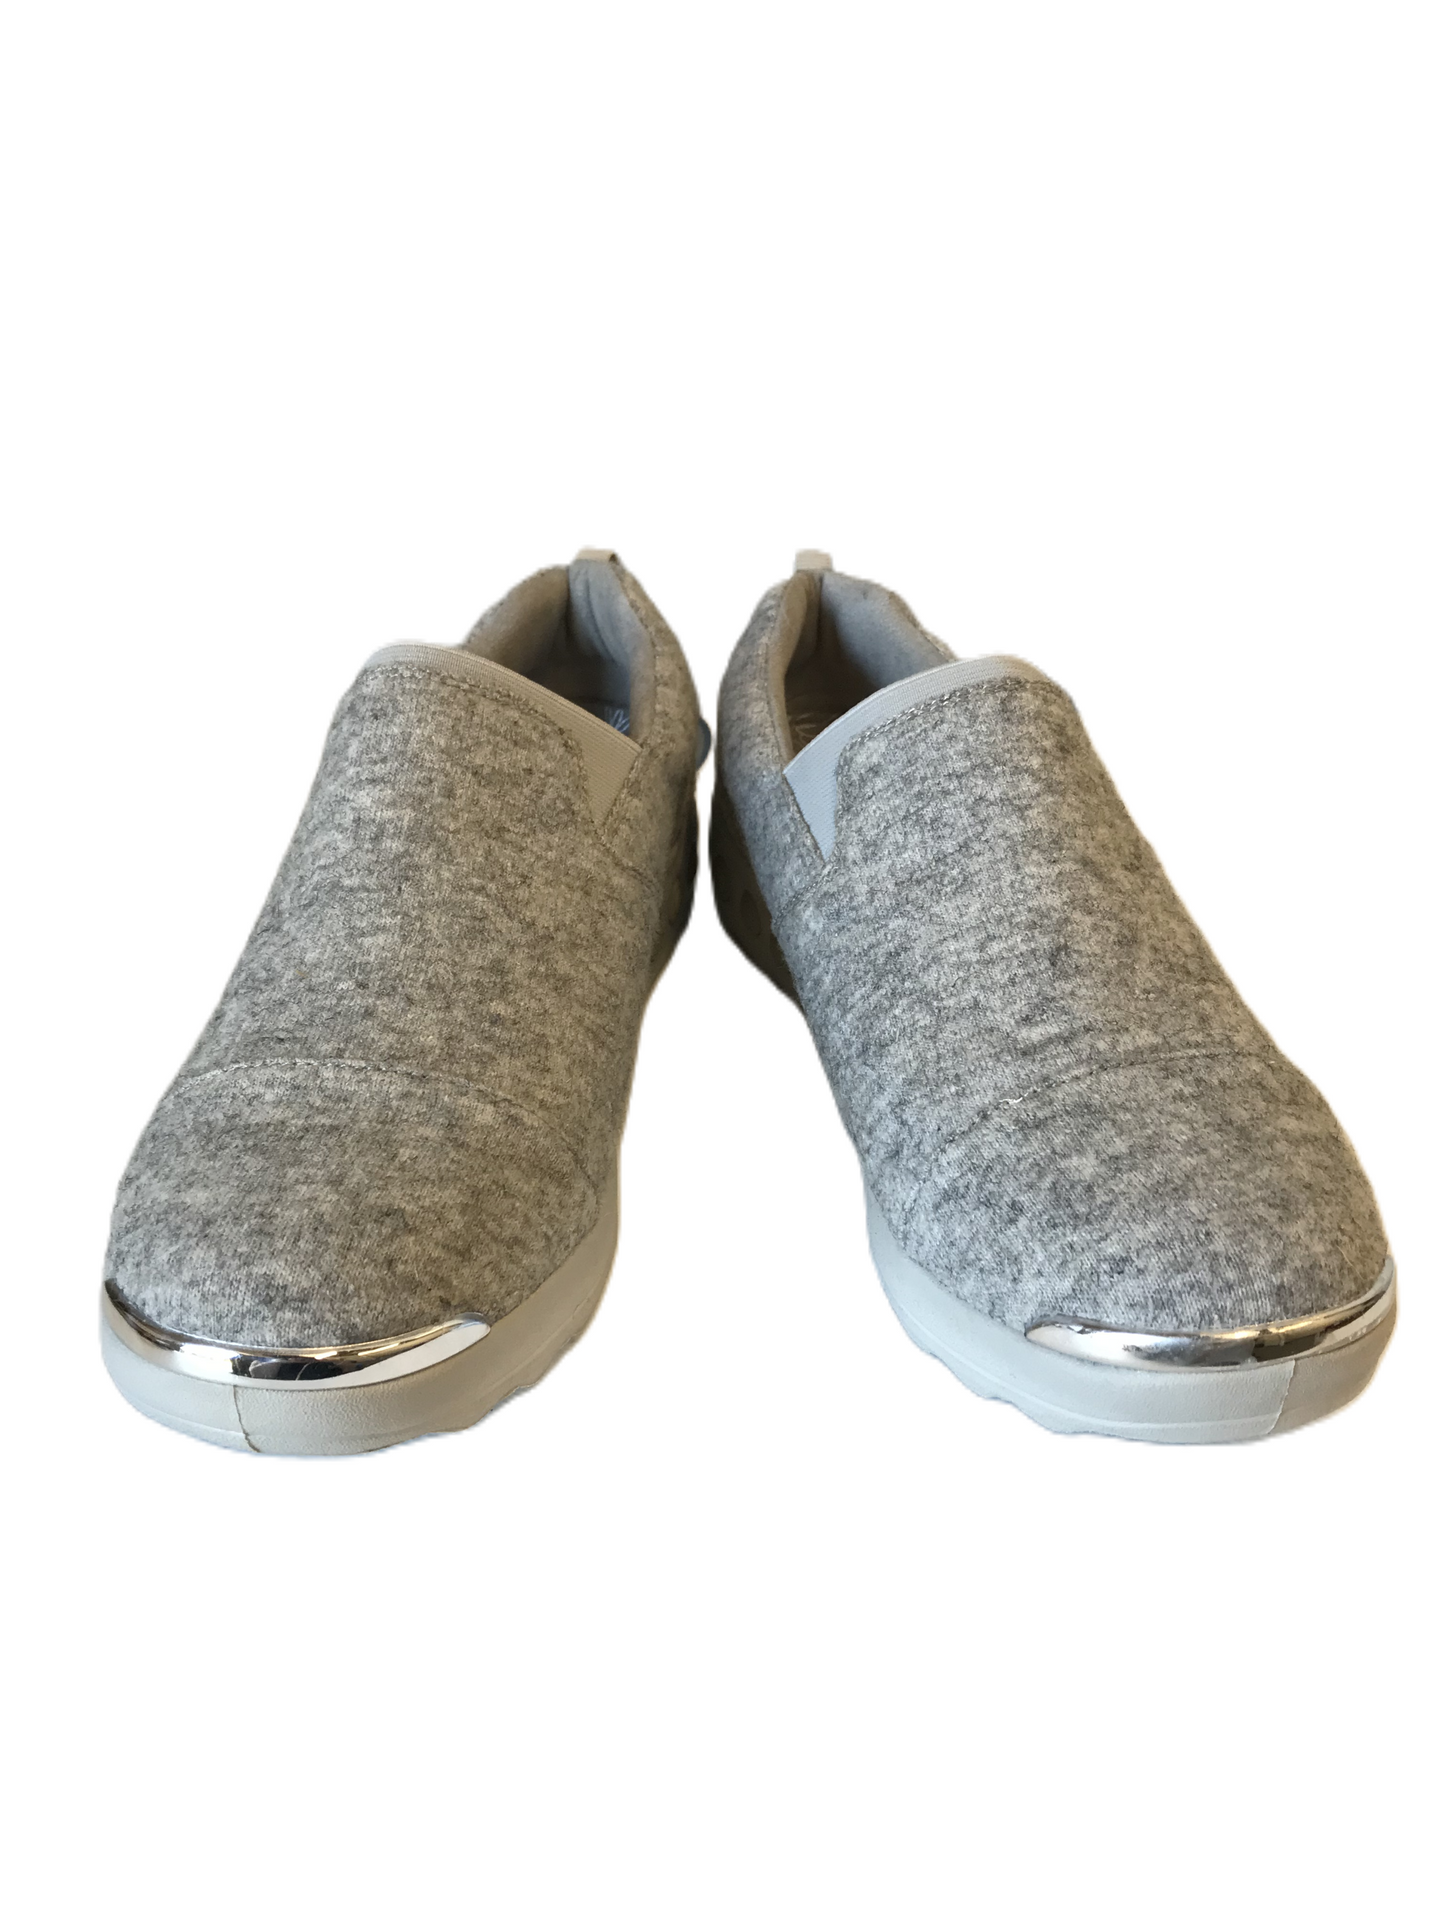 Grey & White Shoes Sneakers By TheraFit Size: 8.5